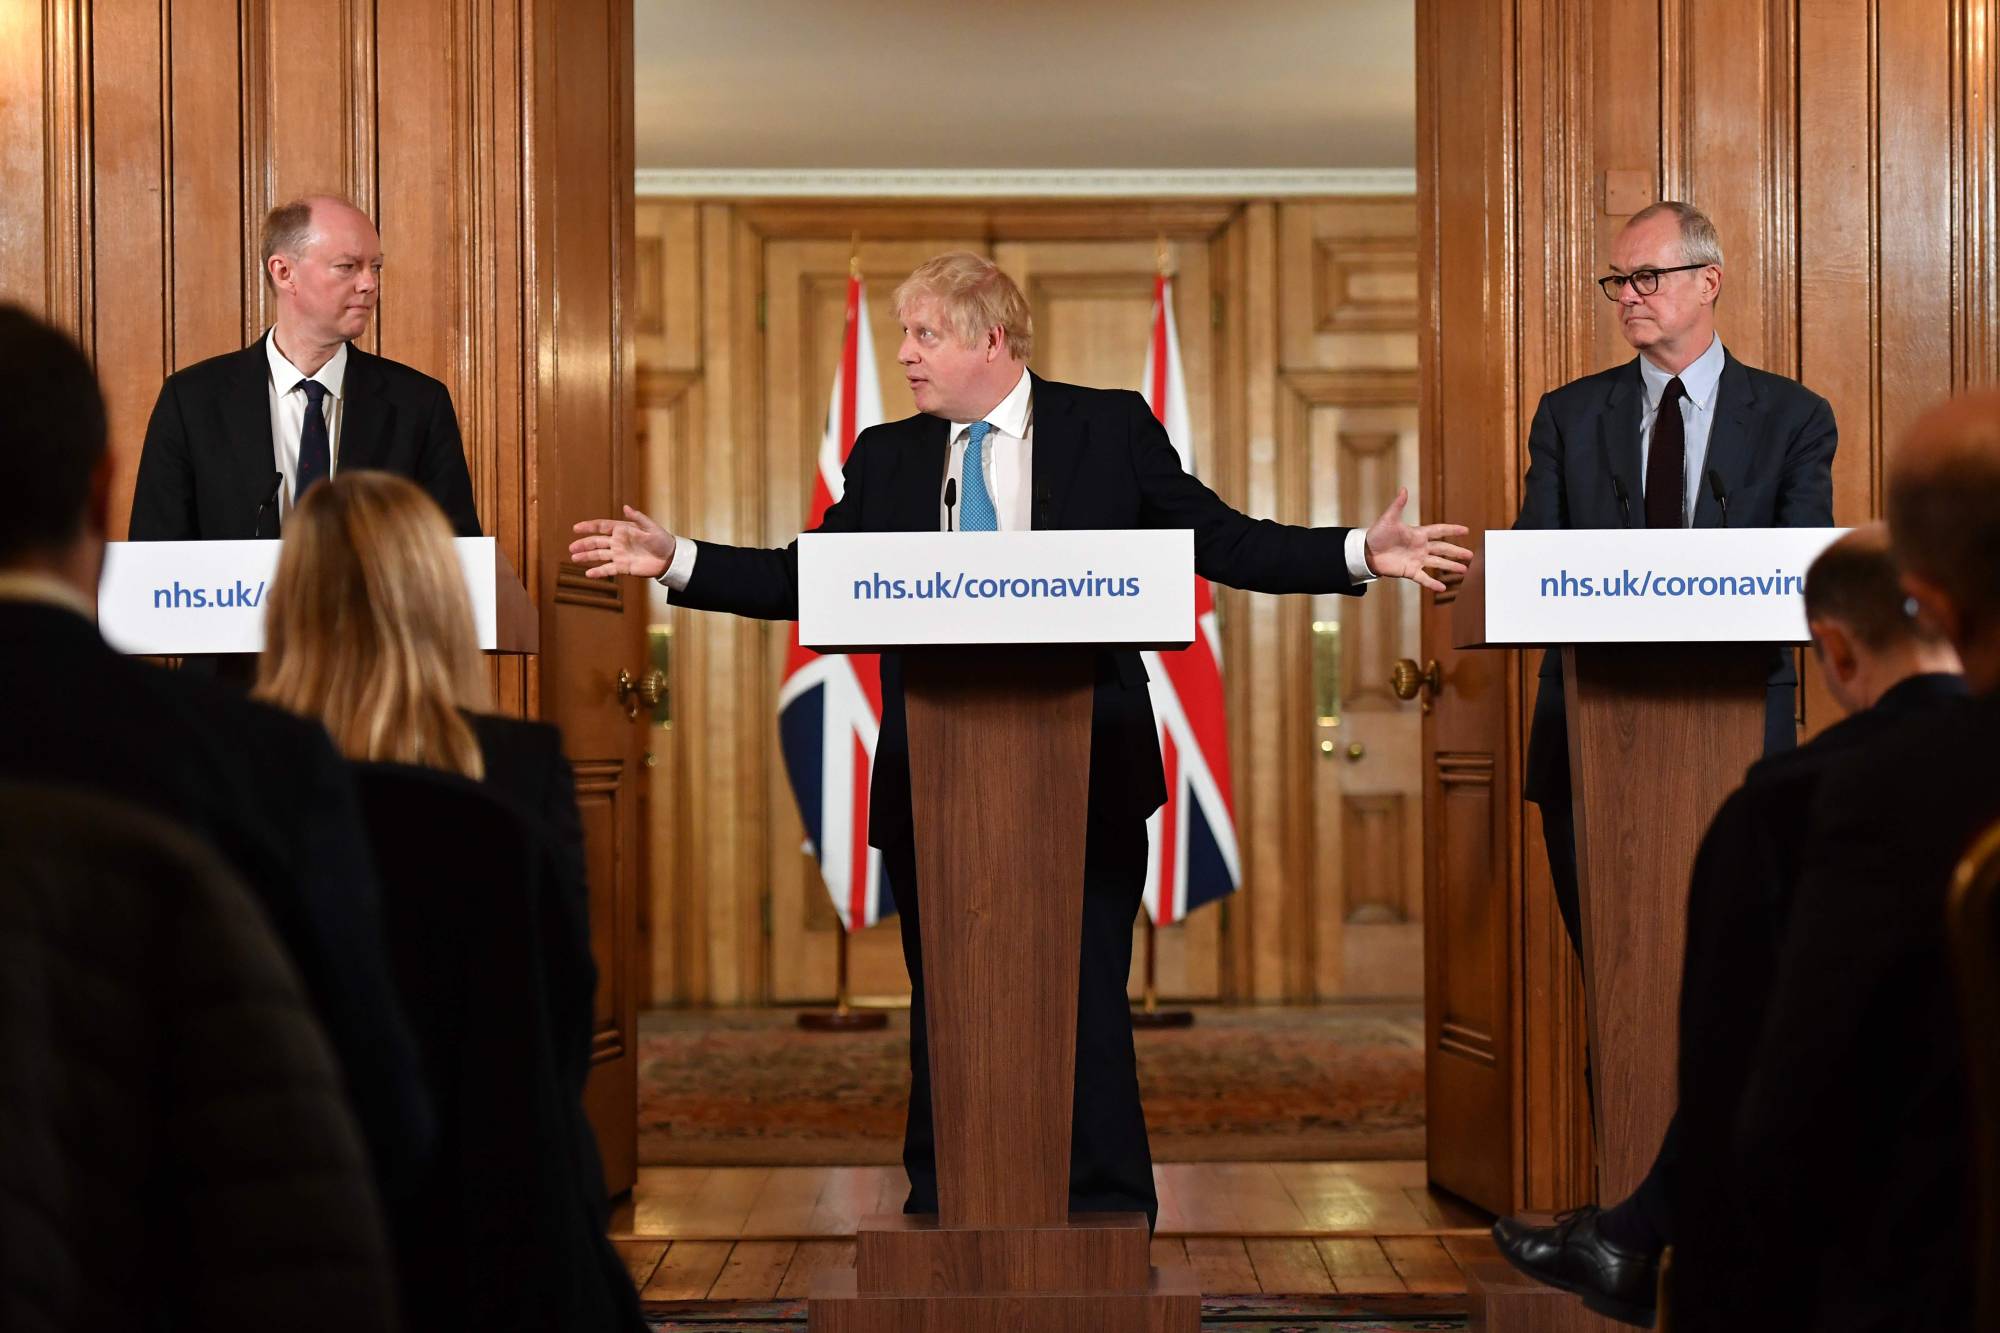 (FILES) In this file photo taken on March 19, 2020 Chief Medical Officer Chris Whitty (L) and Chief Scientific Adviser Patrick Vallance (R) look on as Britain's Prime Minister Boris Johnson addresses a news conference to give a daily update on the government's response to the novel coronavirus COVID-19 outbreak, inside 10 Downing Street in London on March 19, 2020. - British Prime Minister Boris Johnson spent the night in intensive care after being admitted with a deteriorating case of coronavirus, prompting serious concerns on April 7, 2020 about his health and the government's response to a still-escalating outbreak. (Photo by Leon Neal / POOL / AFP)